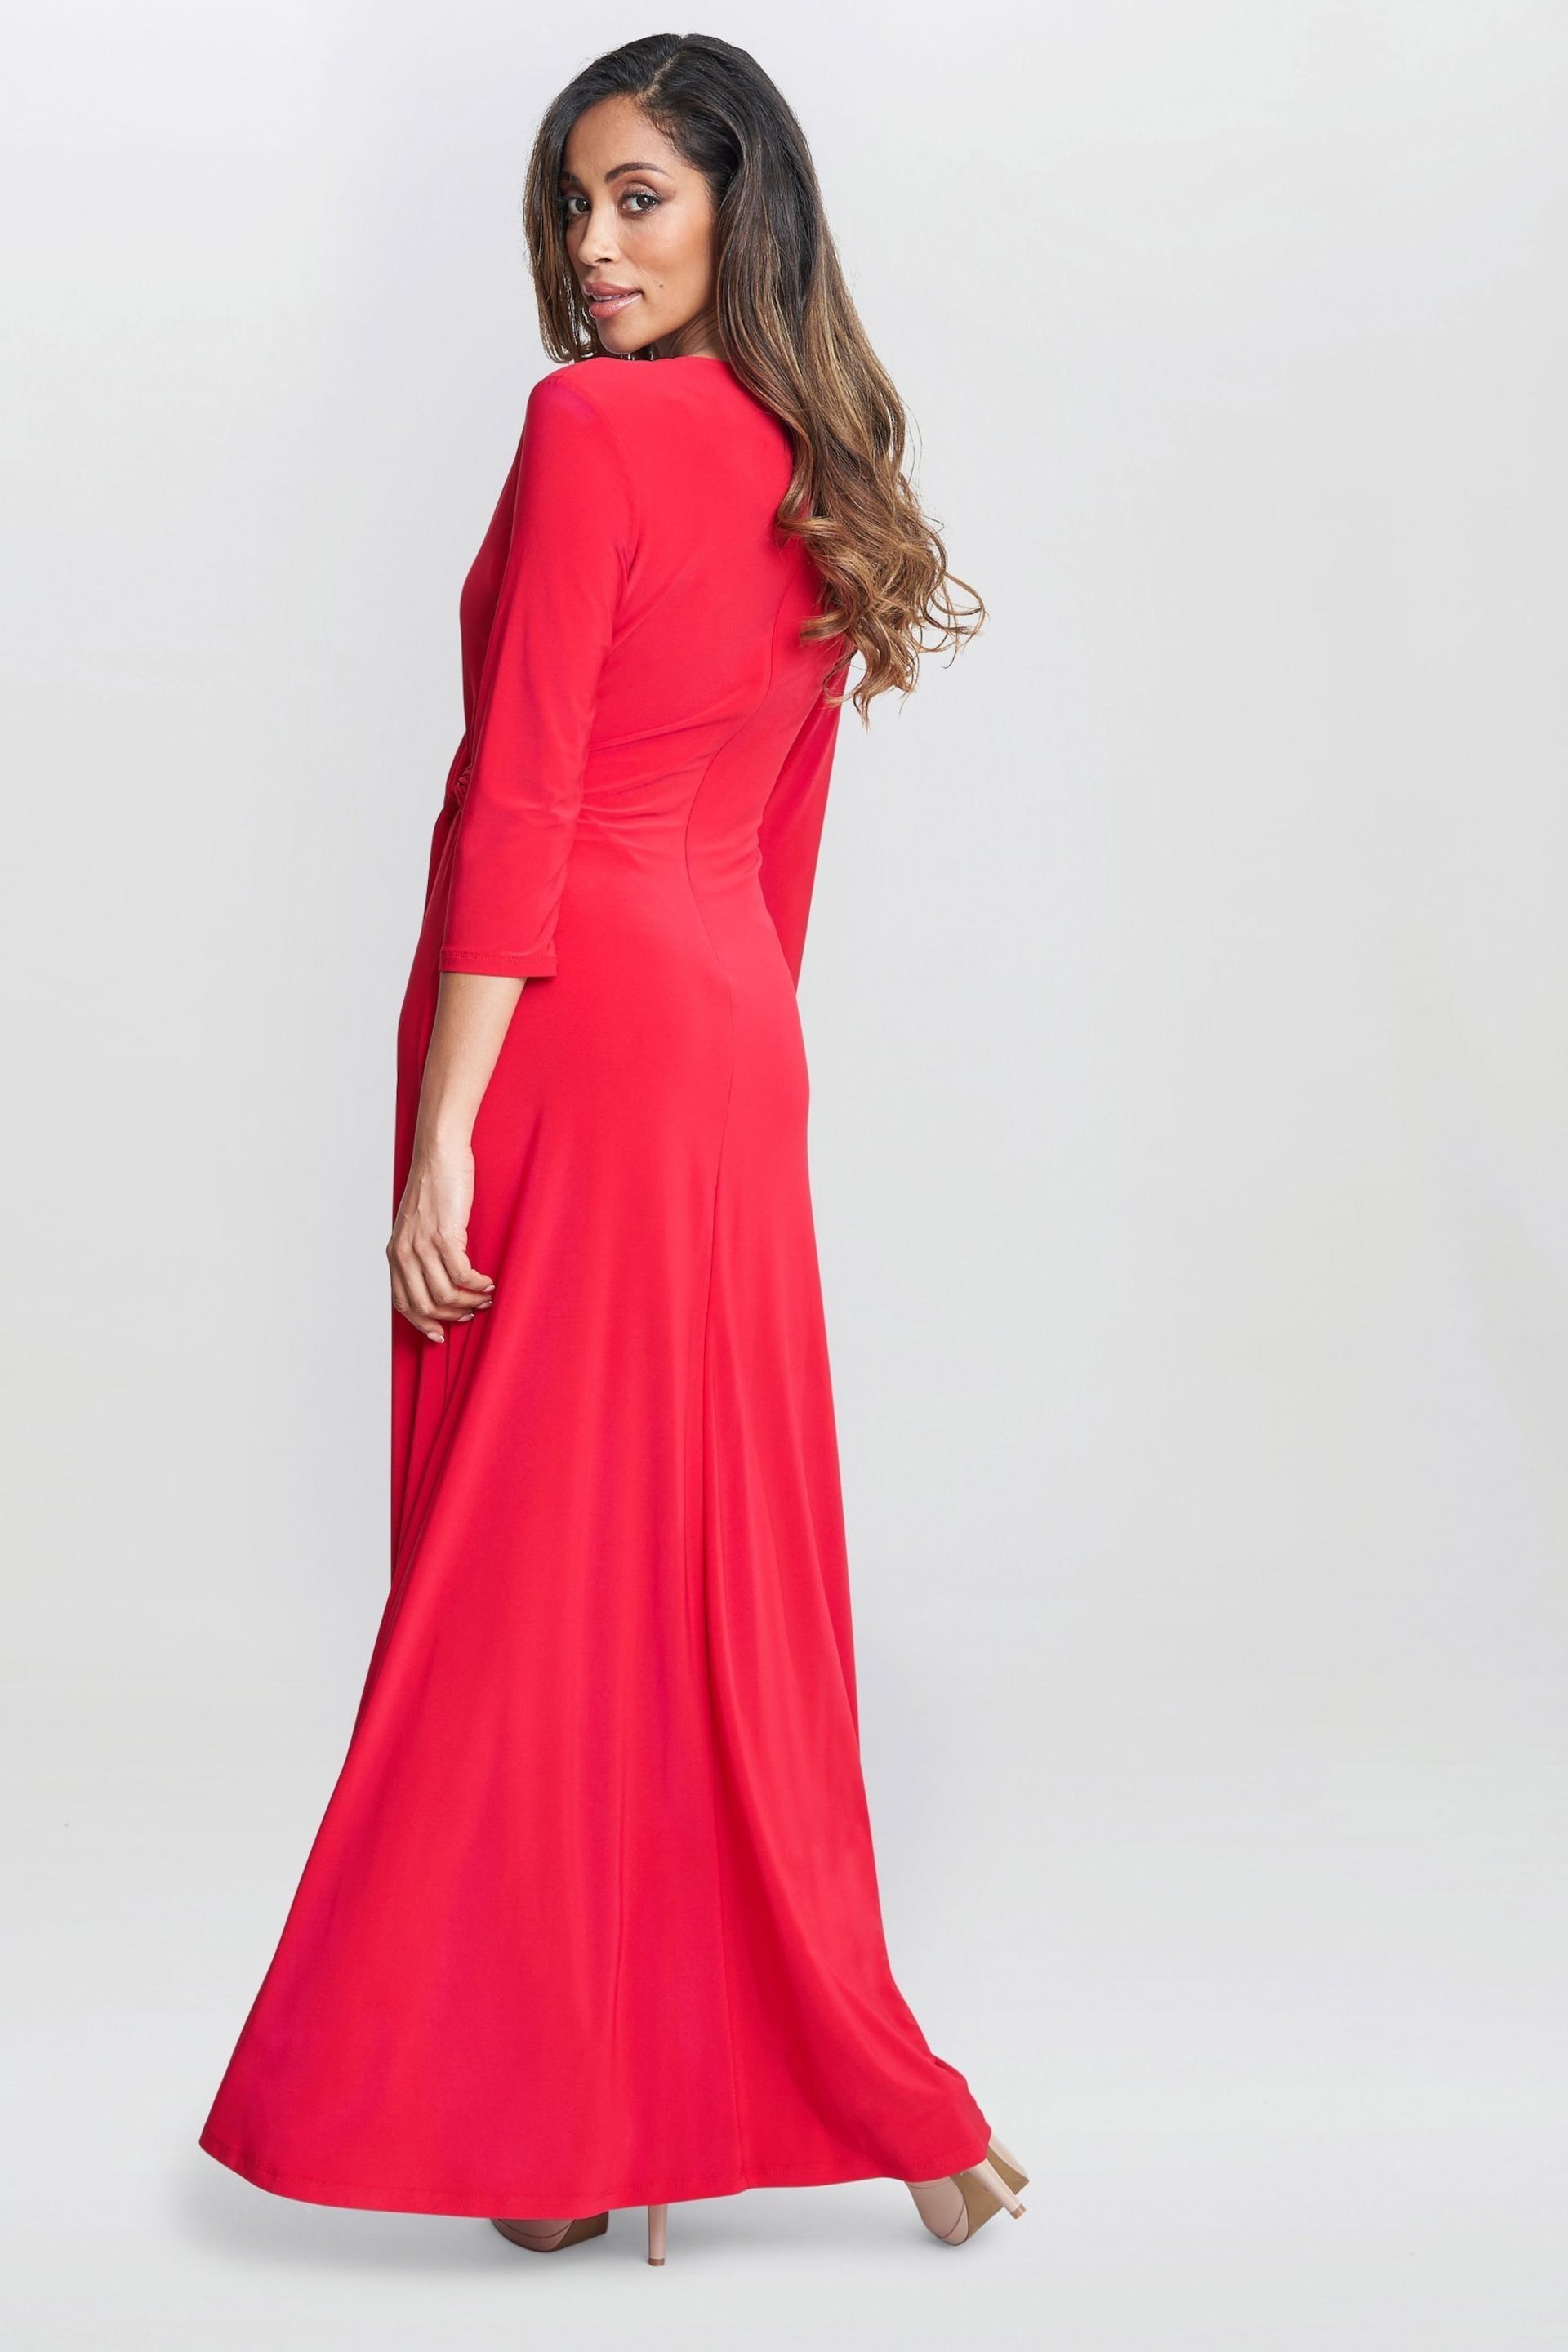 Gina Bacconi Red Celine Jersey Wrap Maxi Dress - Image 2 of 5